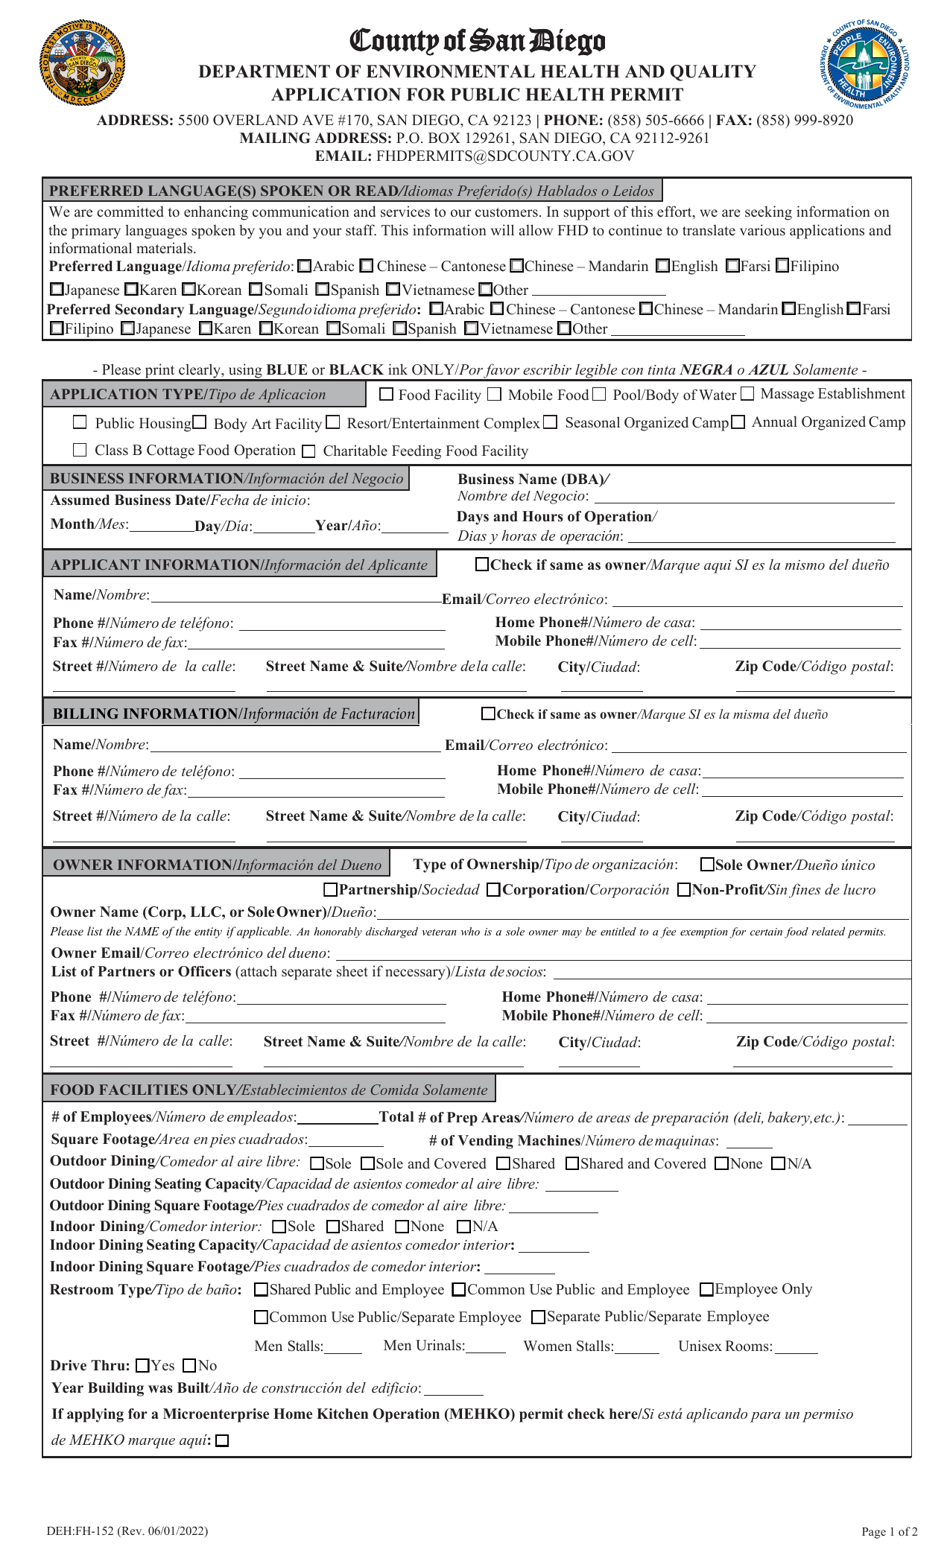 Form DEH:FH-152 Application for Public Health Permit - County of San Diego, California, Page 1